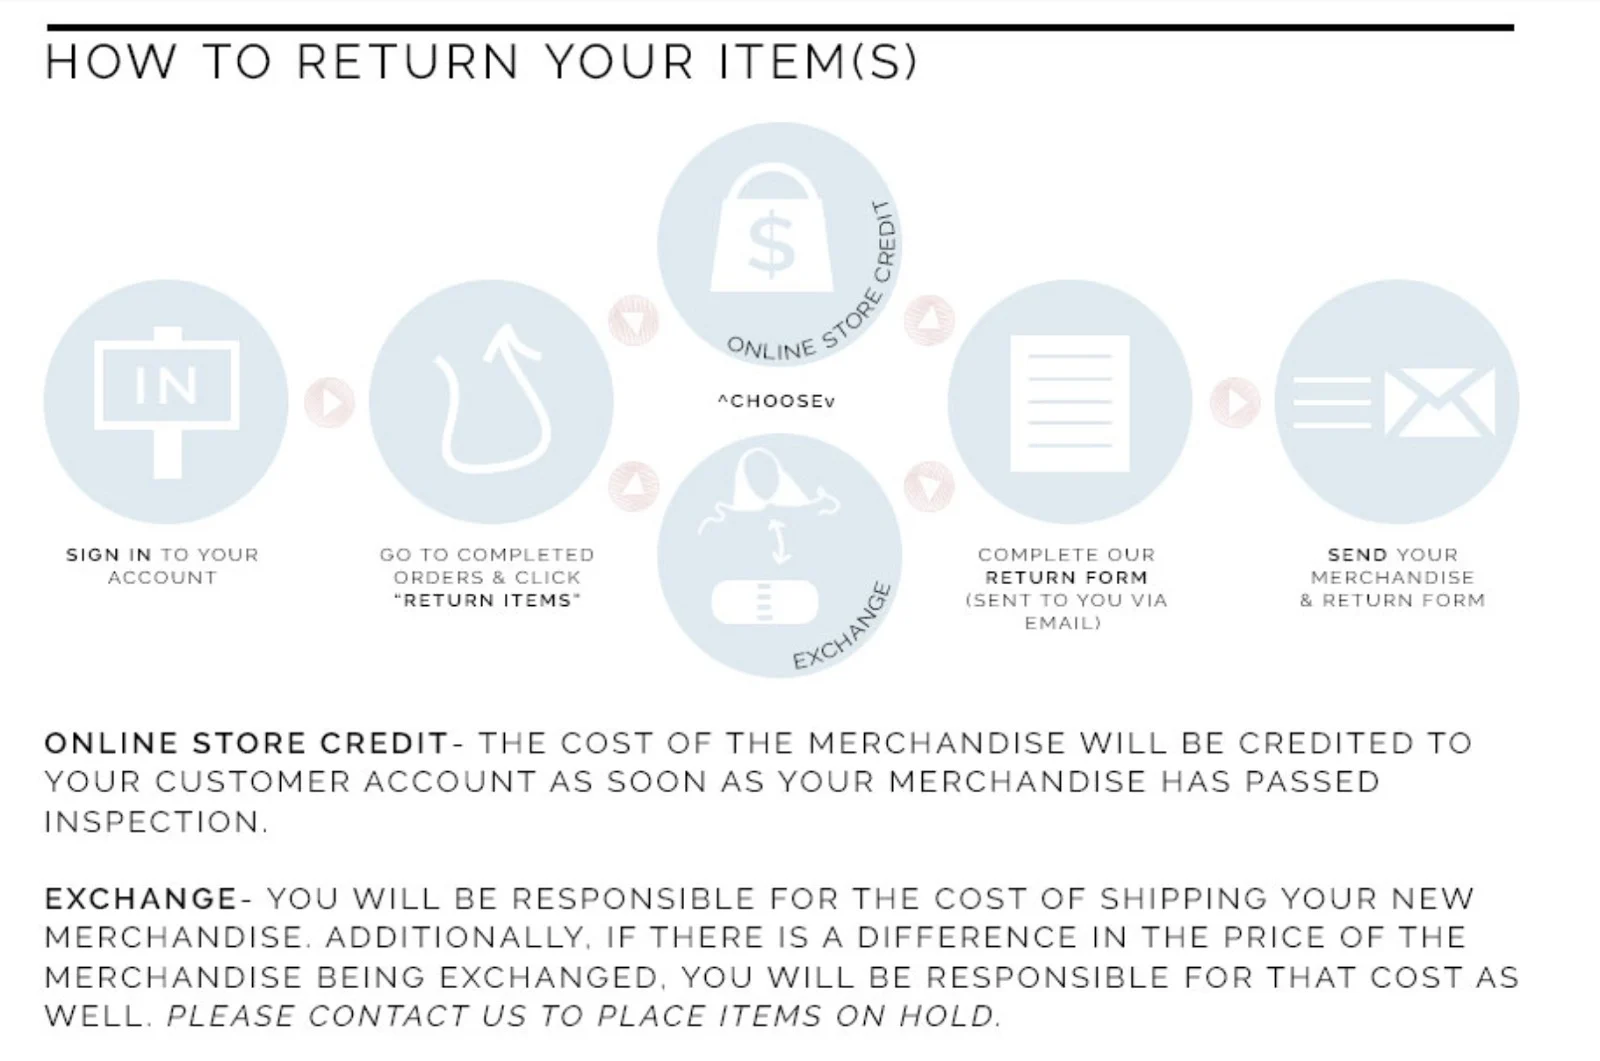 Creating A Return Policy Your Customers Will Love